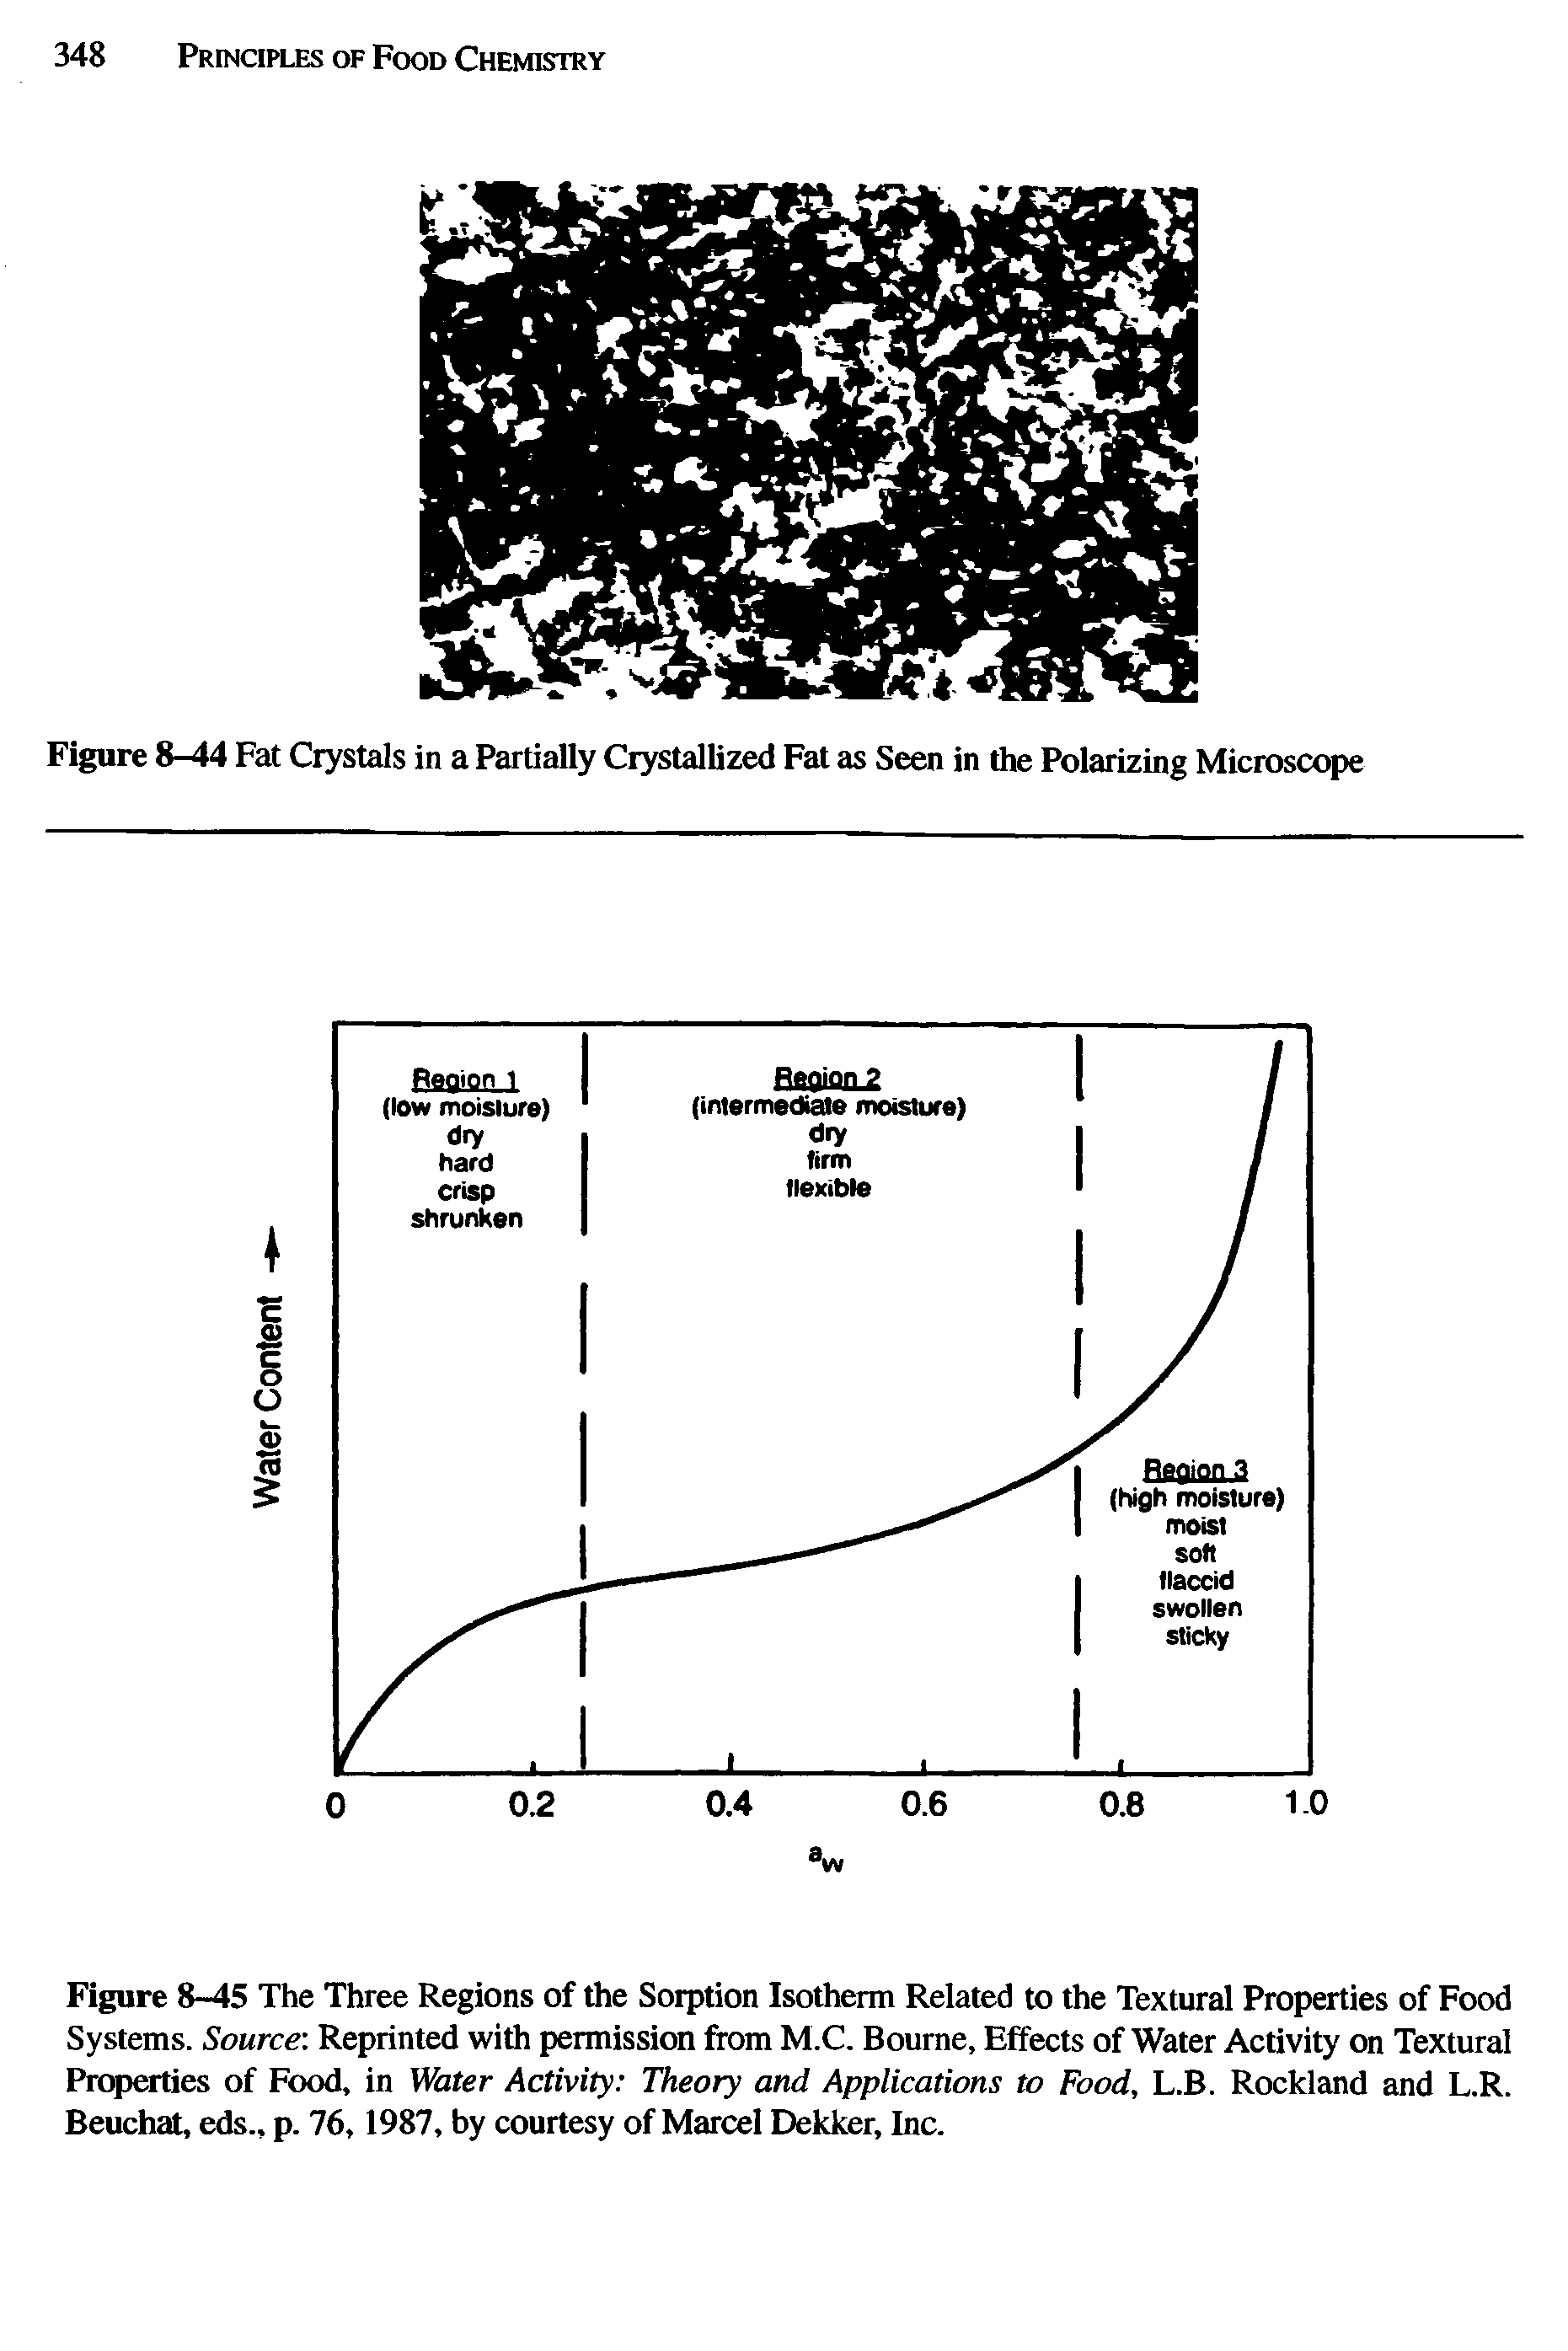 Figure 8-45 The Three Regions of the Sorption Isotherm Related to the Textural Properties of Food Systems. Source Reprinted with permission from M.C. Bourne, Effects of Water Activity on Textural Properties of Food, in Water Activity Theory and Applications to Food, L.B. Rockland and L.R. Beuchat, eds., p. 76,1987, by courtesy of Marcel Dekker, Inc.